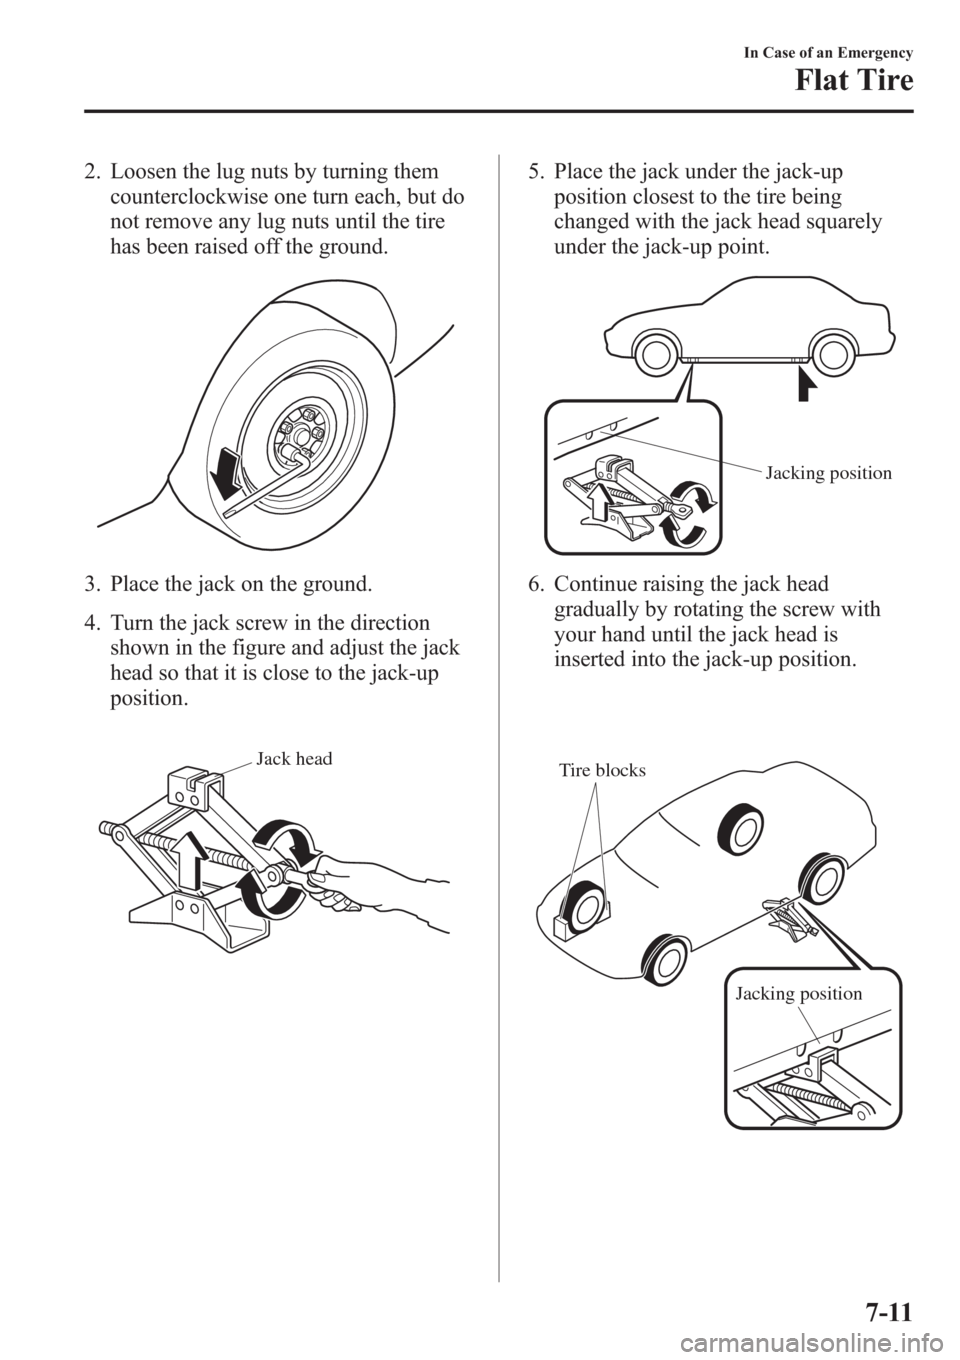 MAZDA MODEL 3 HATCHBACK 2013  Owners Manual (in English) 2. Loosen the lug nuts by turning them
counterclockwise one turn each, but do
not remove any lug nuts until the tire
has been raised off the ground.
3. Place the jack on the ground.
4. Turn the jack s